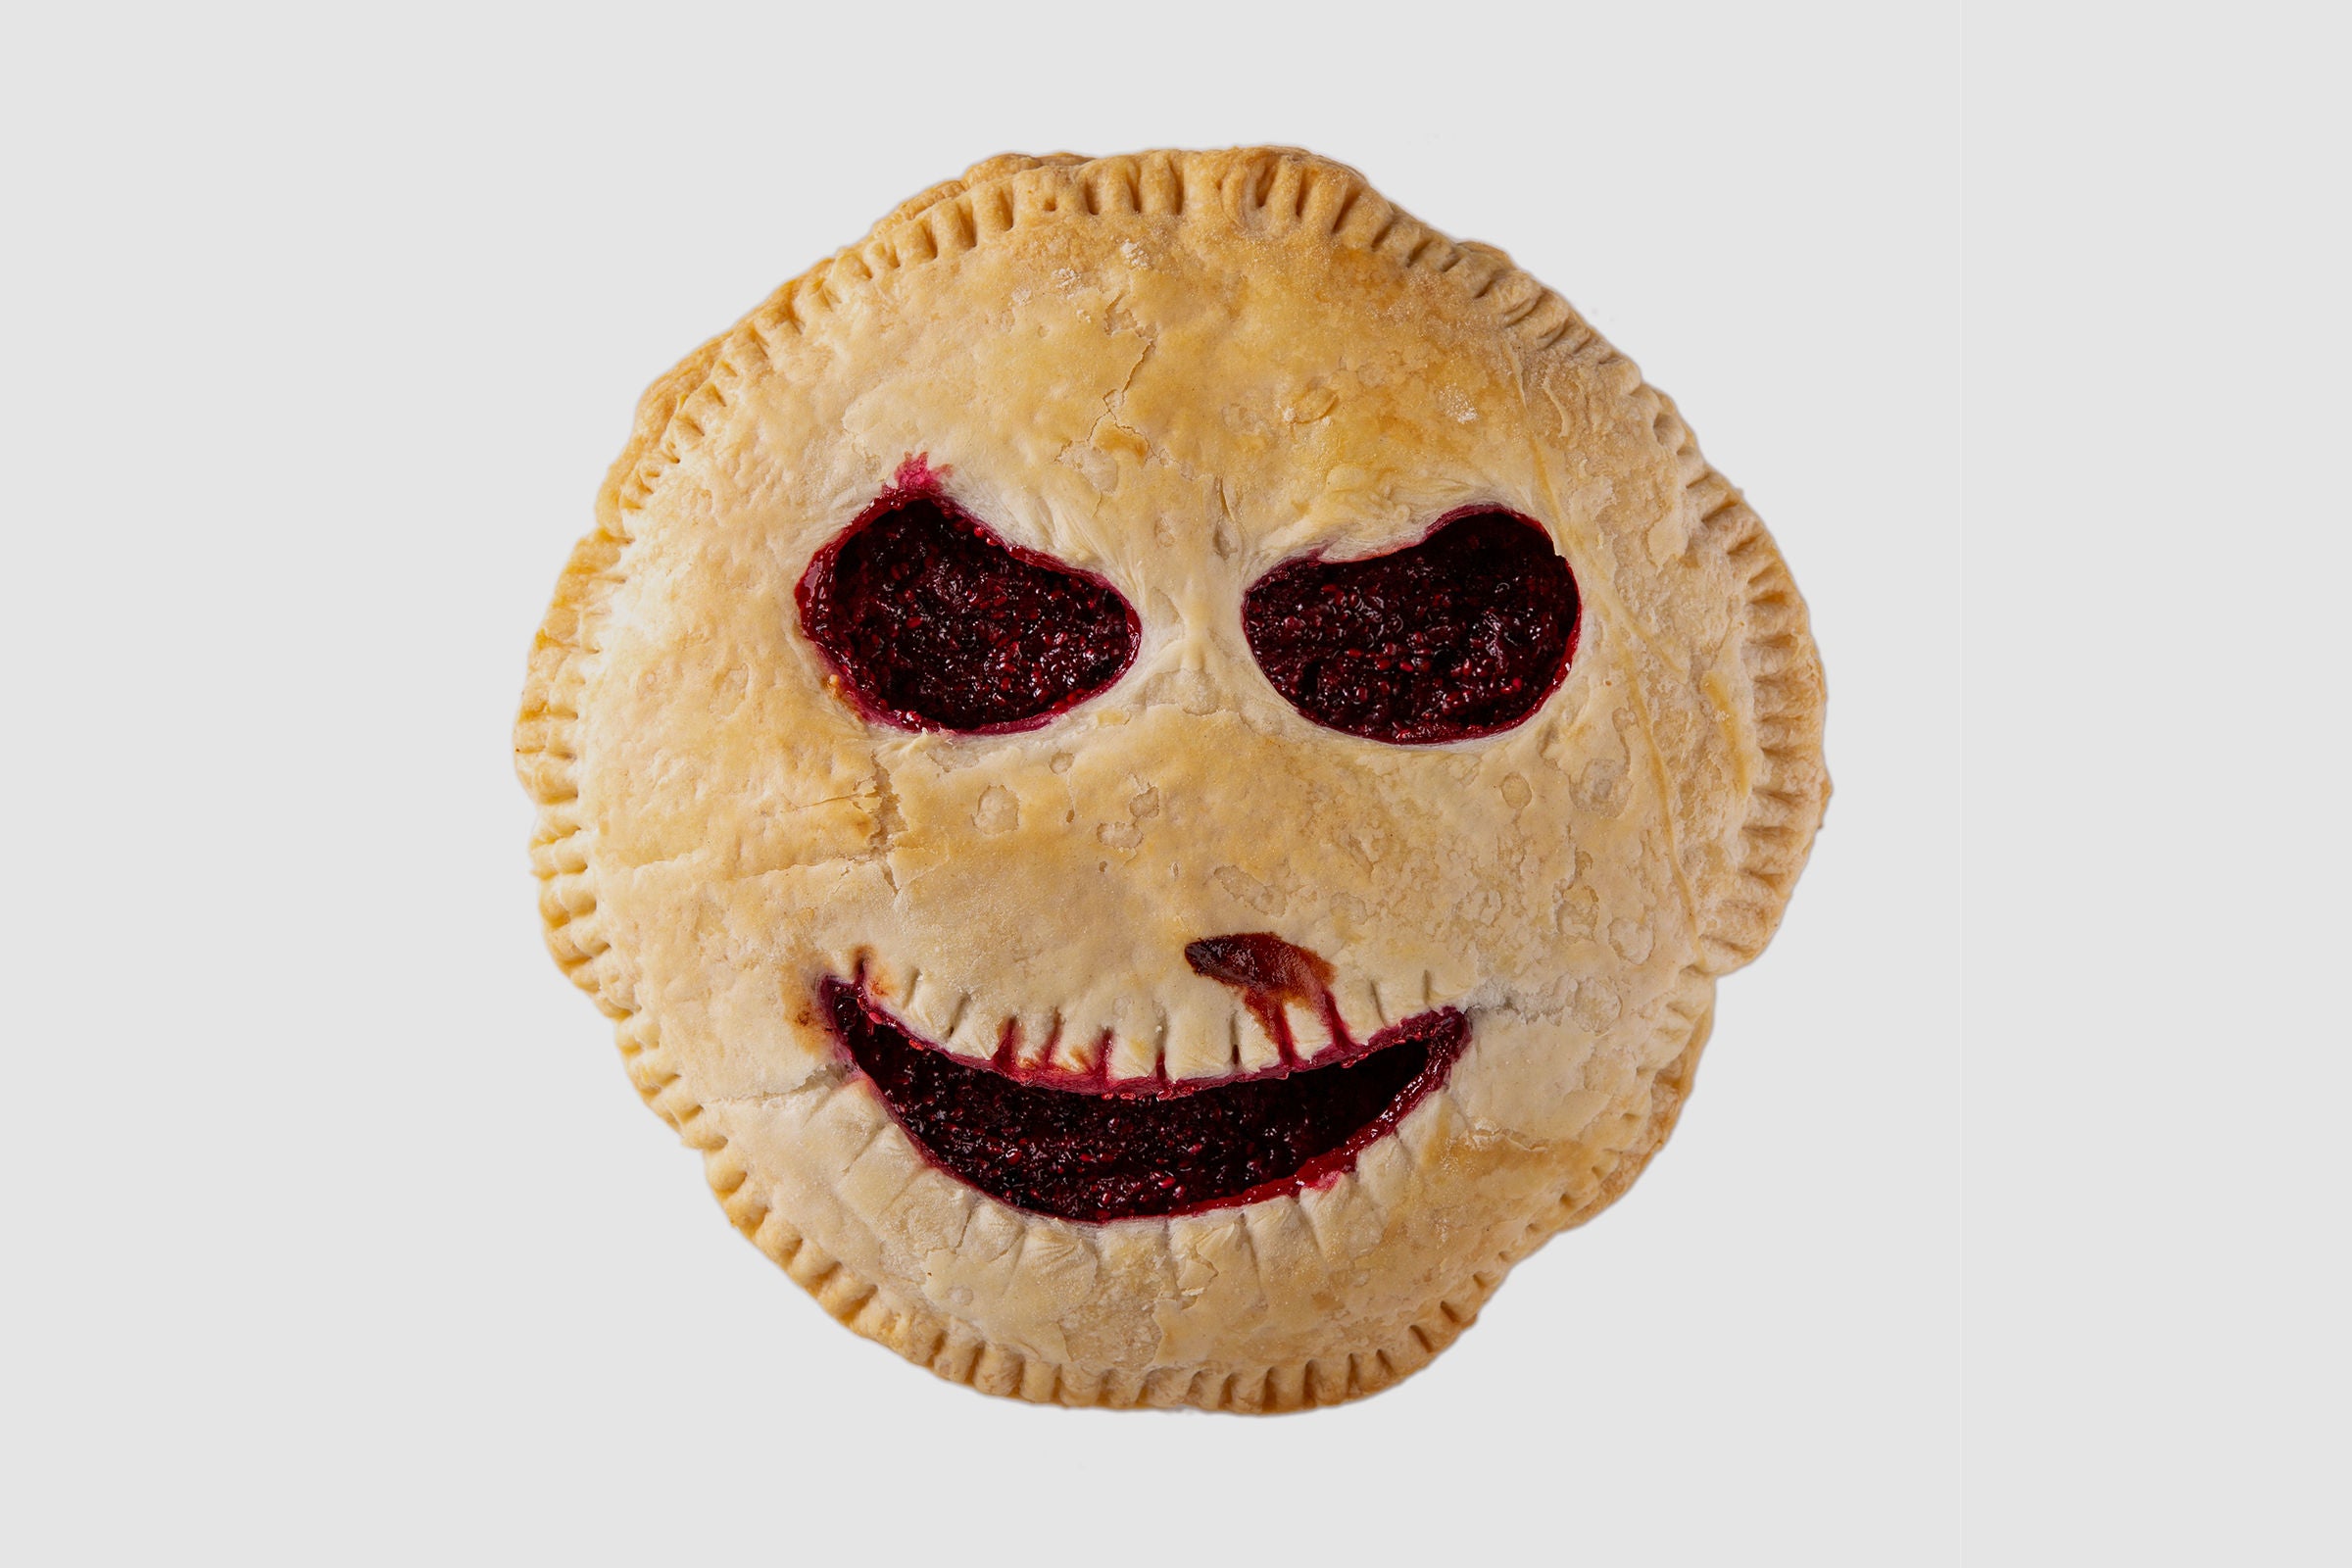 Halloween fruit pie with creepy face cut out of the pie top.